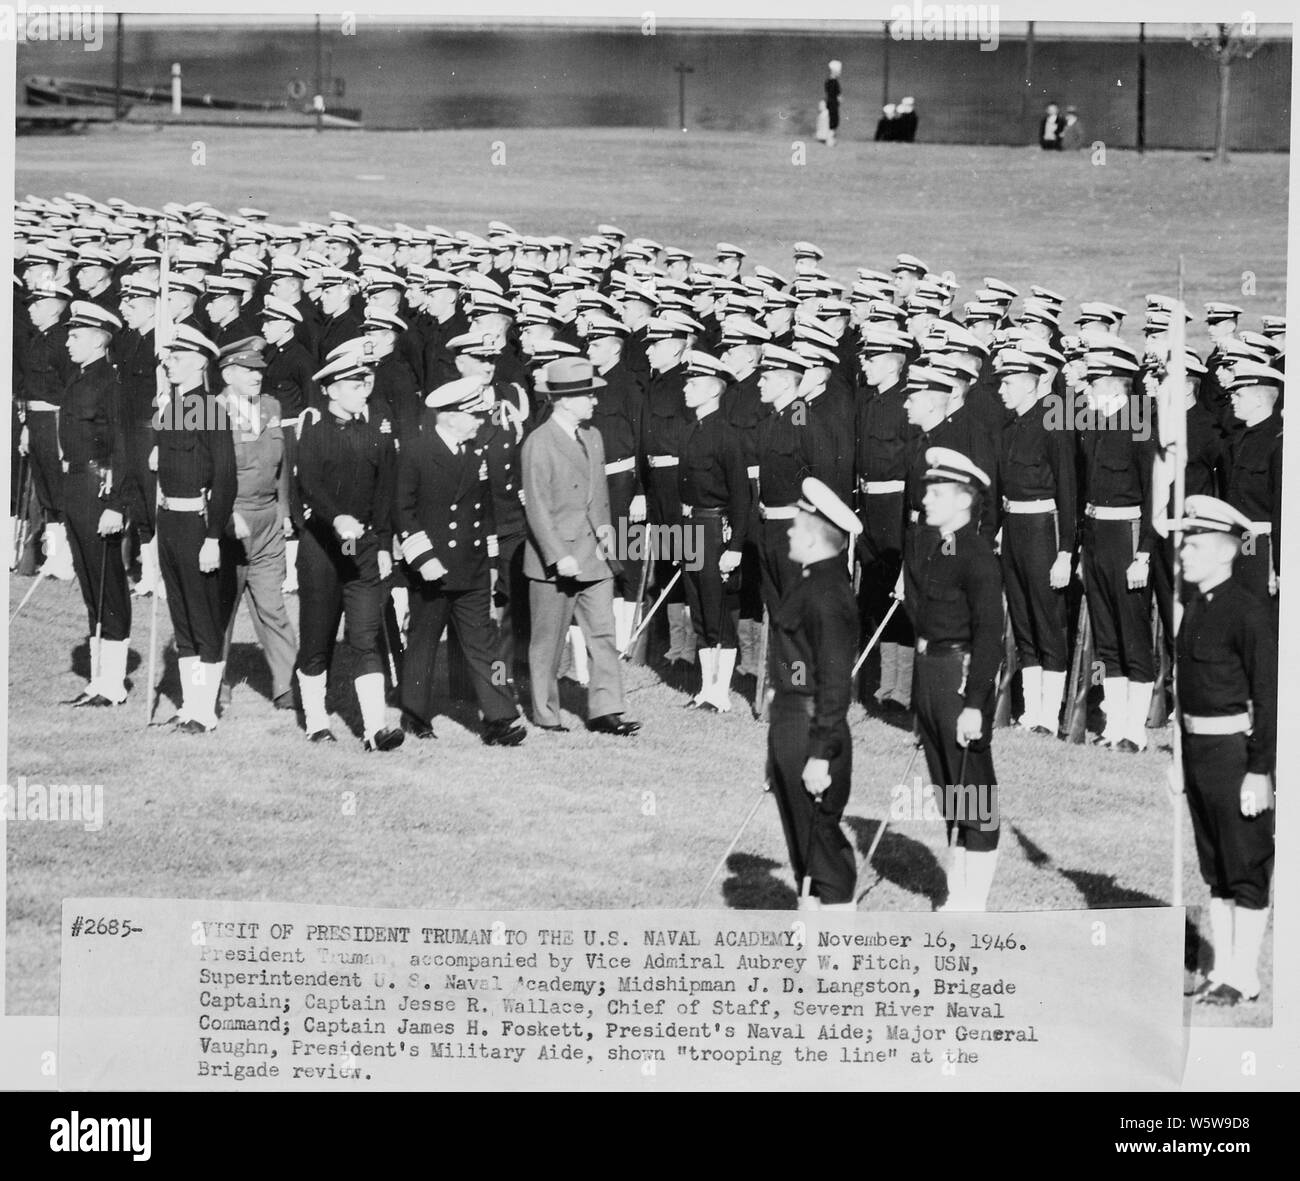 Photograph of President Truman trooping the line of Midshipmen at the Brigade review, during his visit to the U.S. Naval Academy, accompanied by Vice Admiral Aubrey Fitch, Superintendent of the Academy; Midshipman J. D. Langston, Brigade Captain; Captain Jesse R. Wallace, Chief of Staff, Severn River Naval Command; Captain James Foskett, Naval Aide to the President; and General Harry Vaughan, Military Aide to the President. Stock Photo